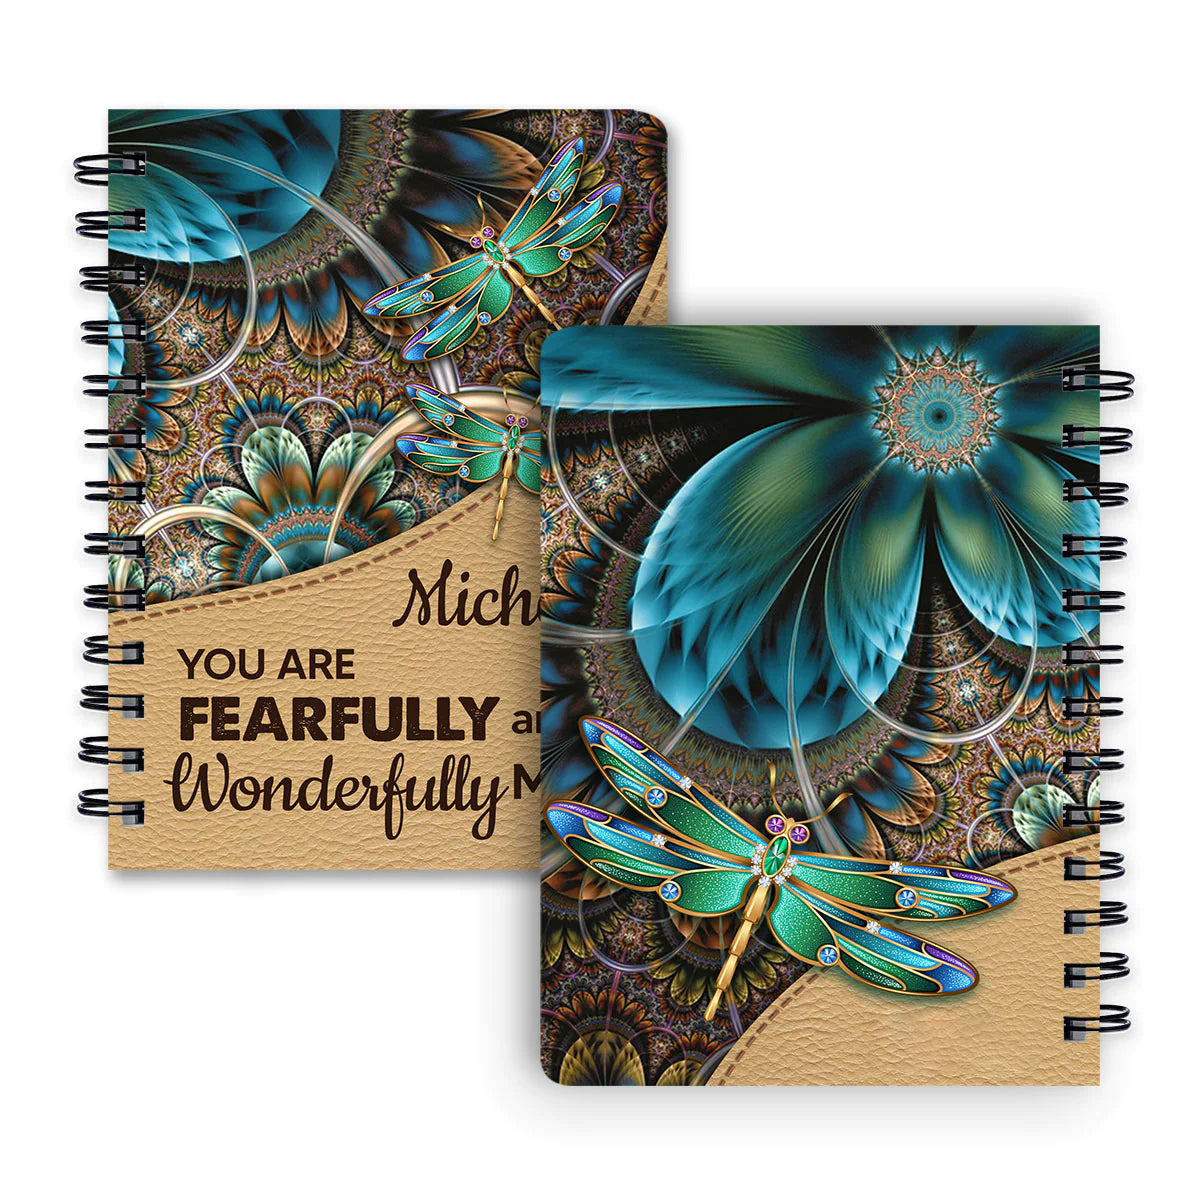 Christianart Spiral Journal, You Are Fearfully And Wonderfully Made, Personalized Spiral Journal, Jesus Spiral Journal. - Christian Art Bag